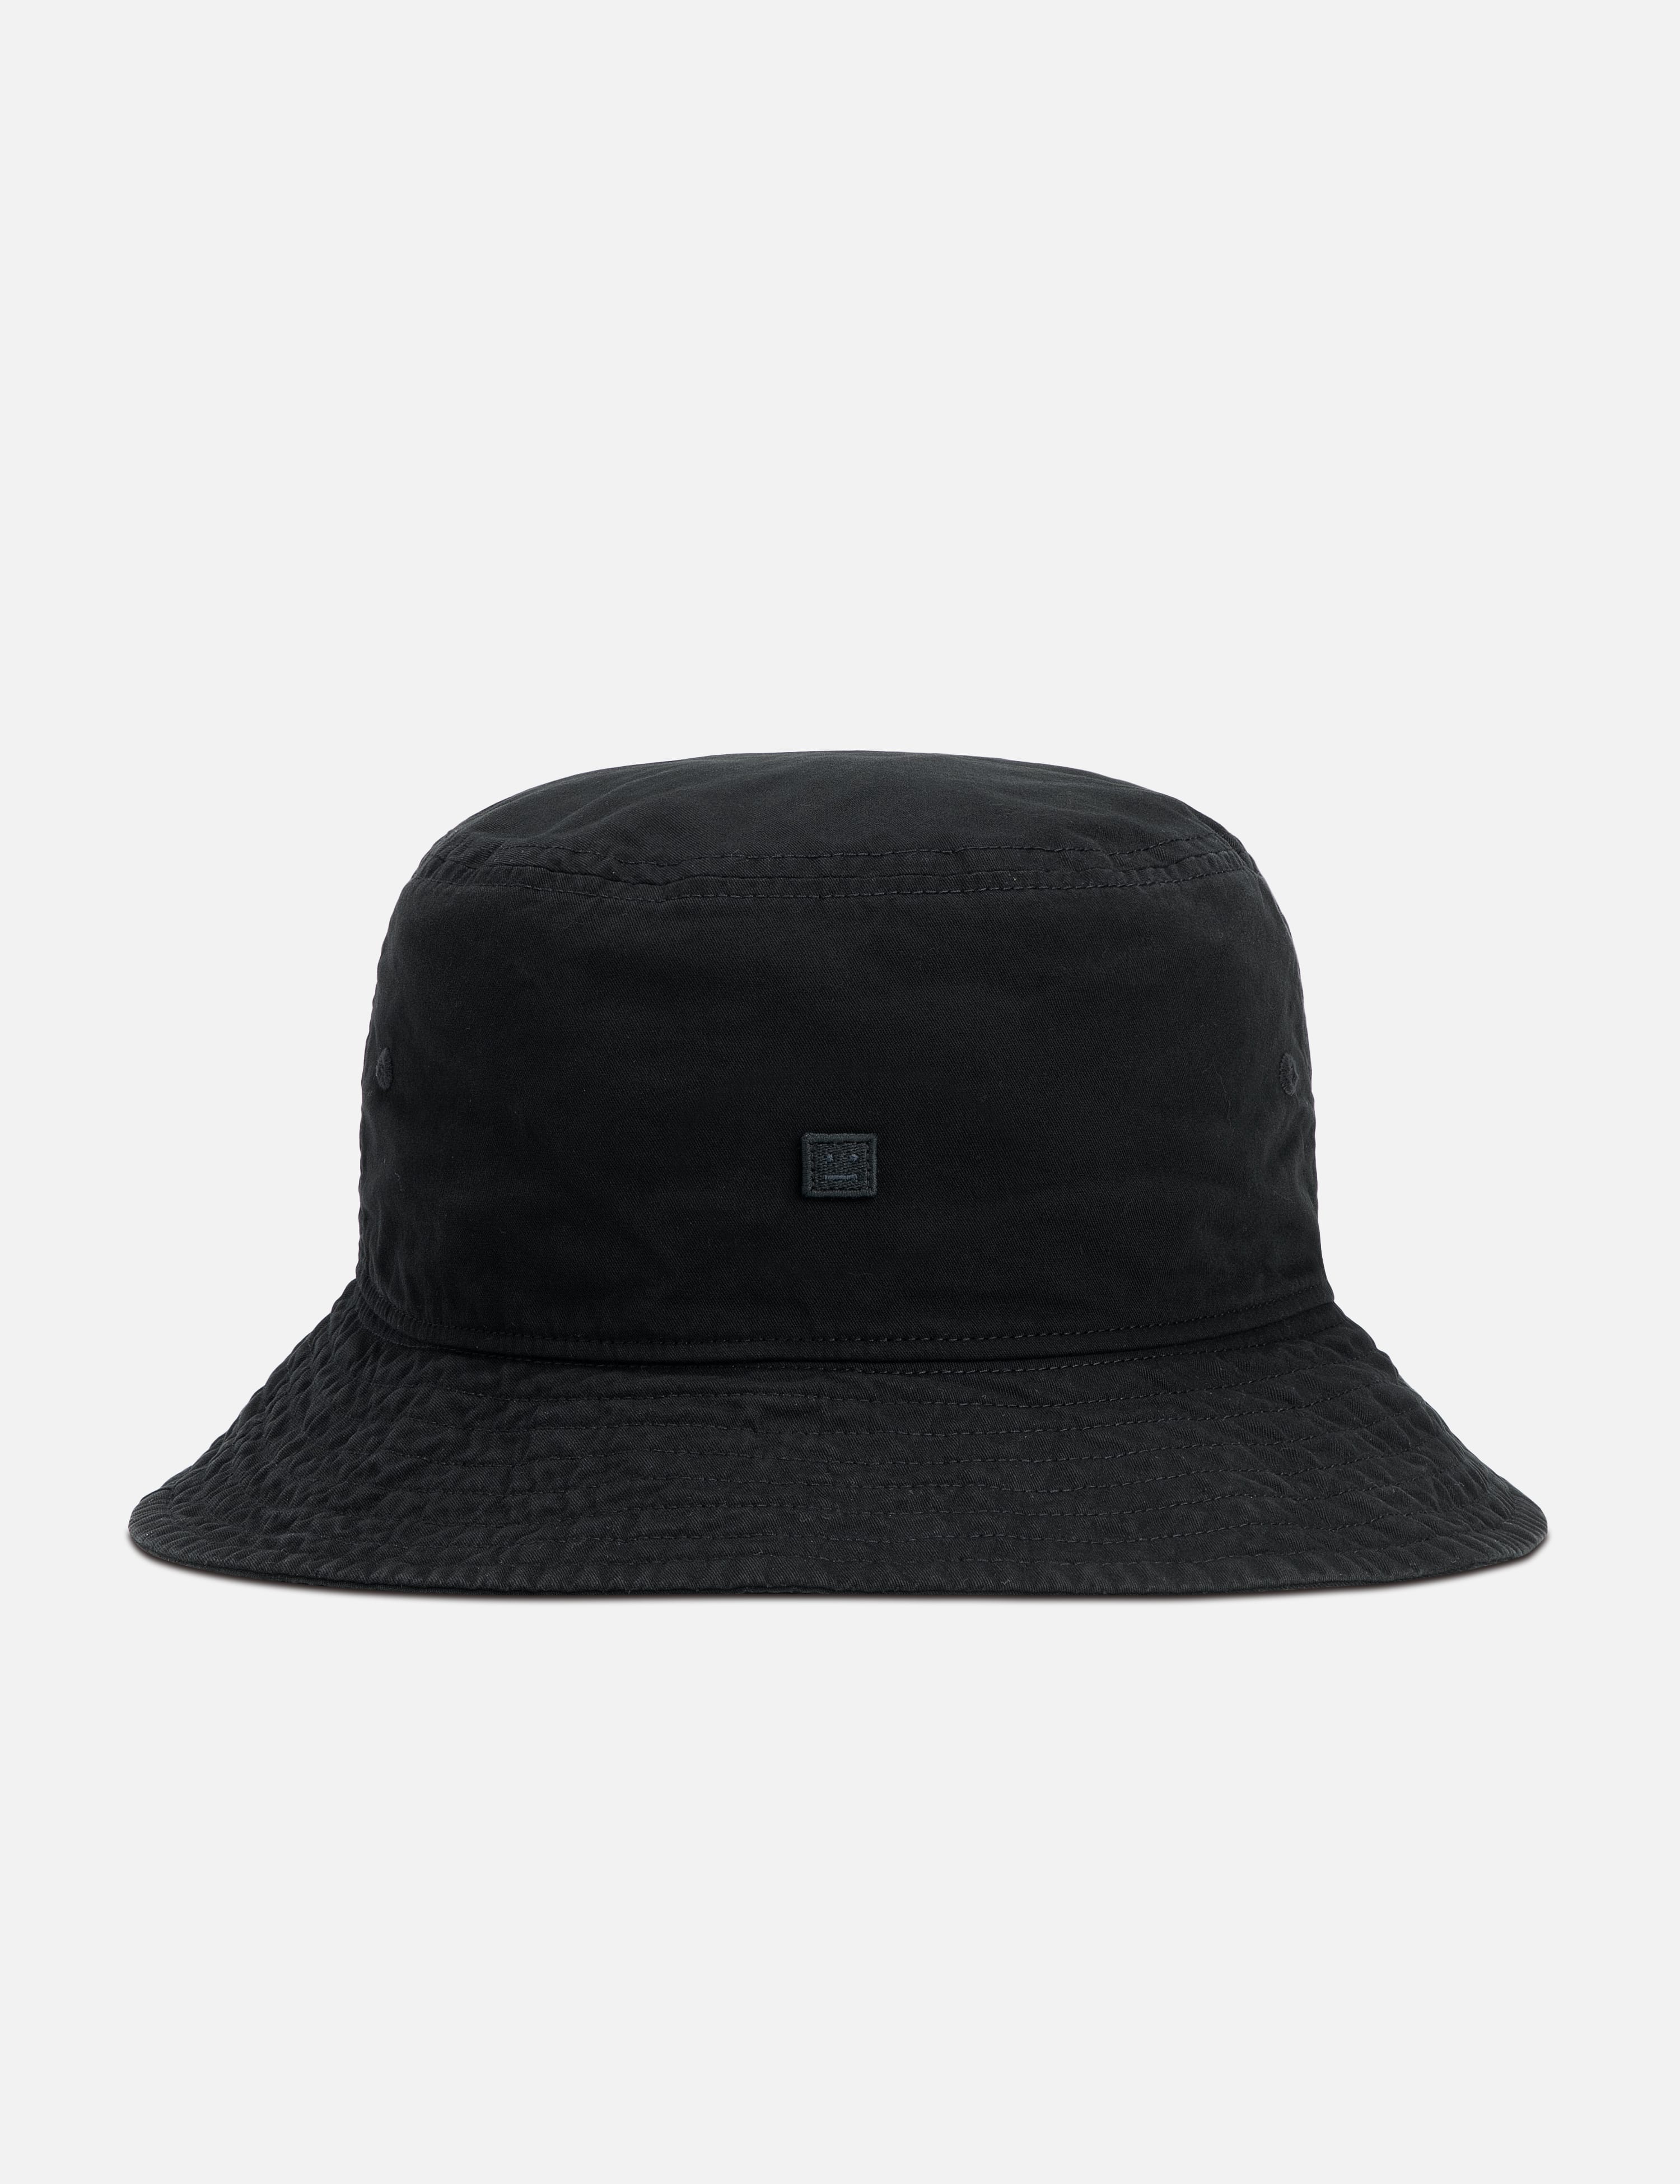 Needles - Bermuda Hat | HBX - Globally Curated Fashion and 